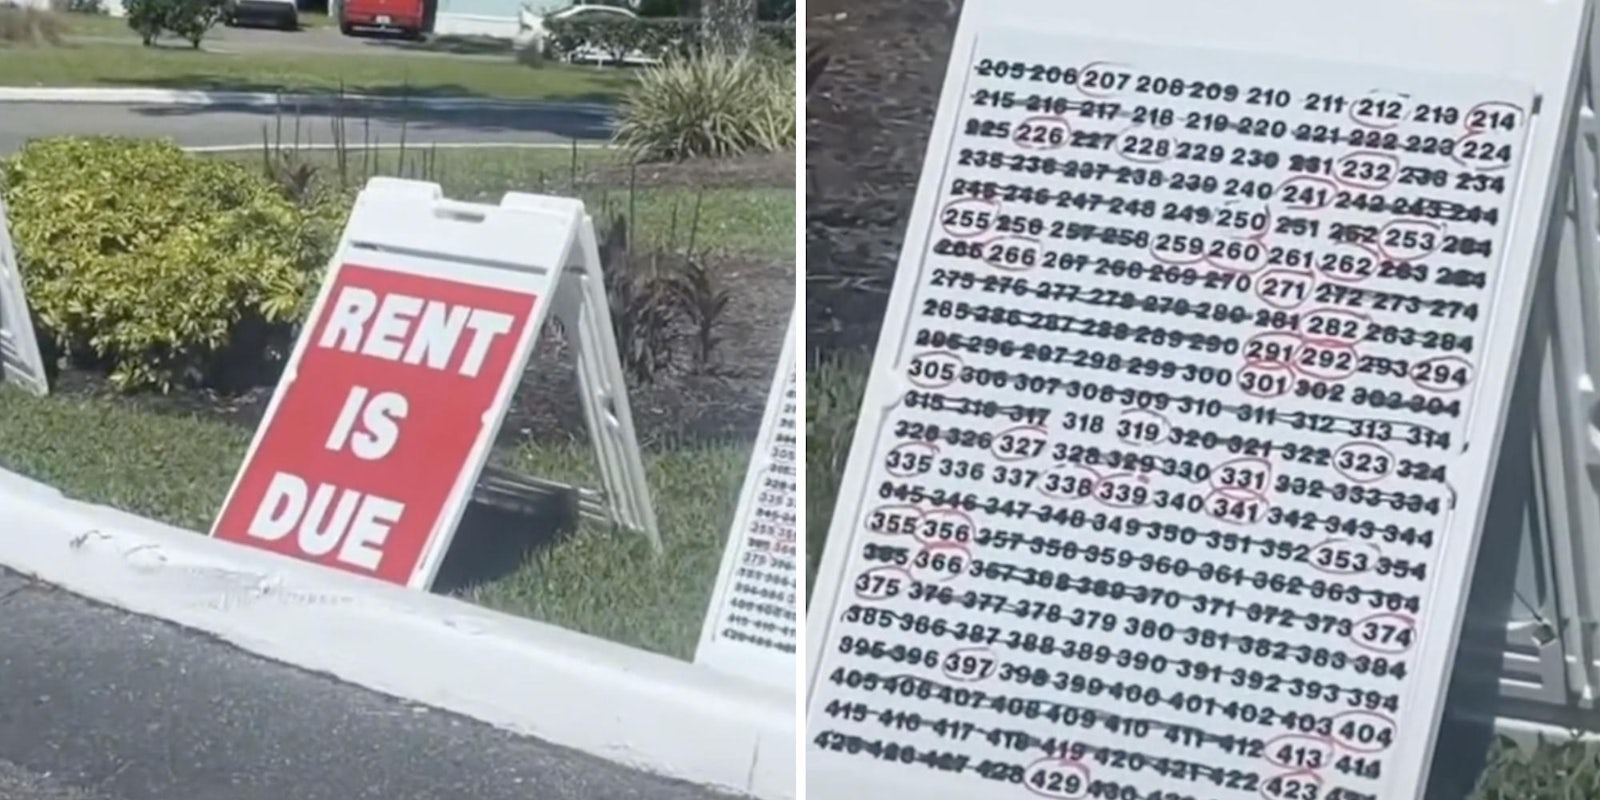 sign on lawn that says 'rent is due' (l) sign on lawn that has phone numbers on it (r)